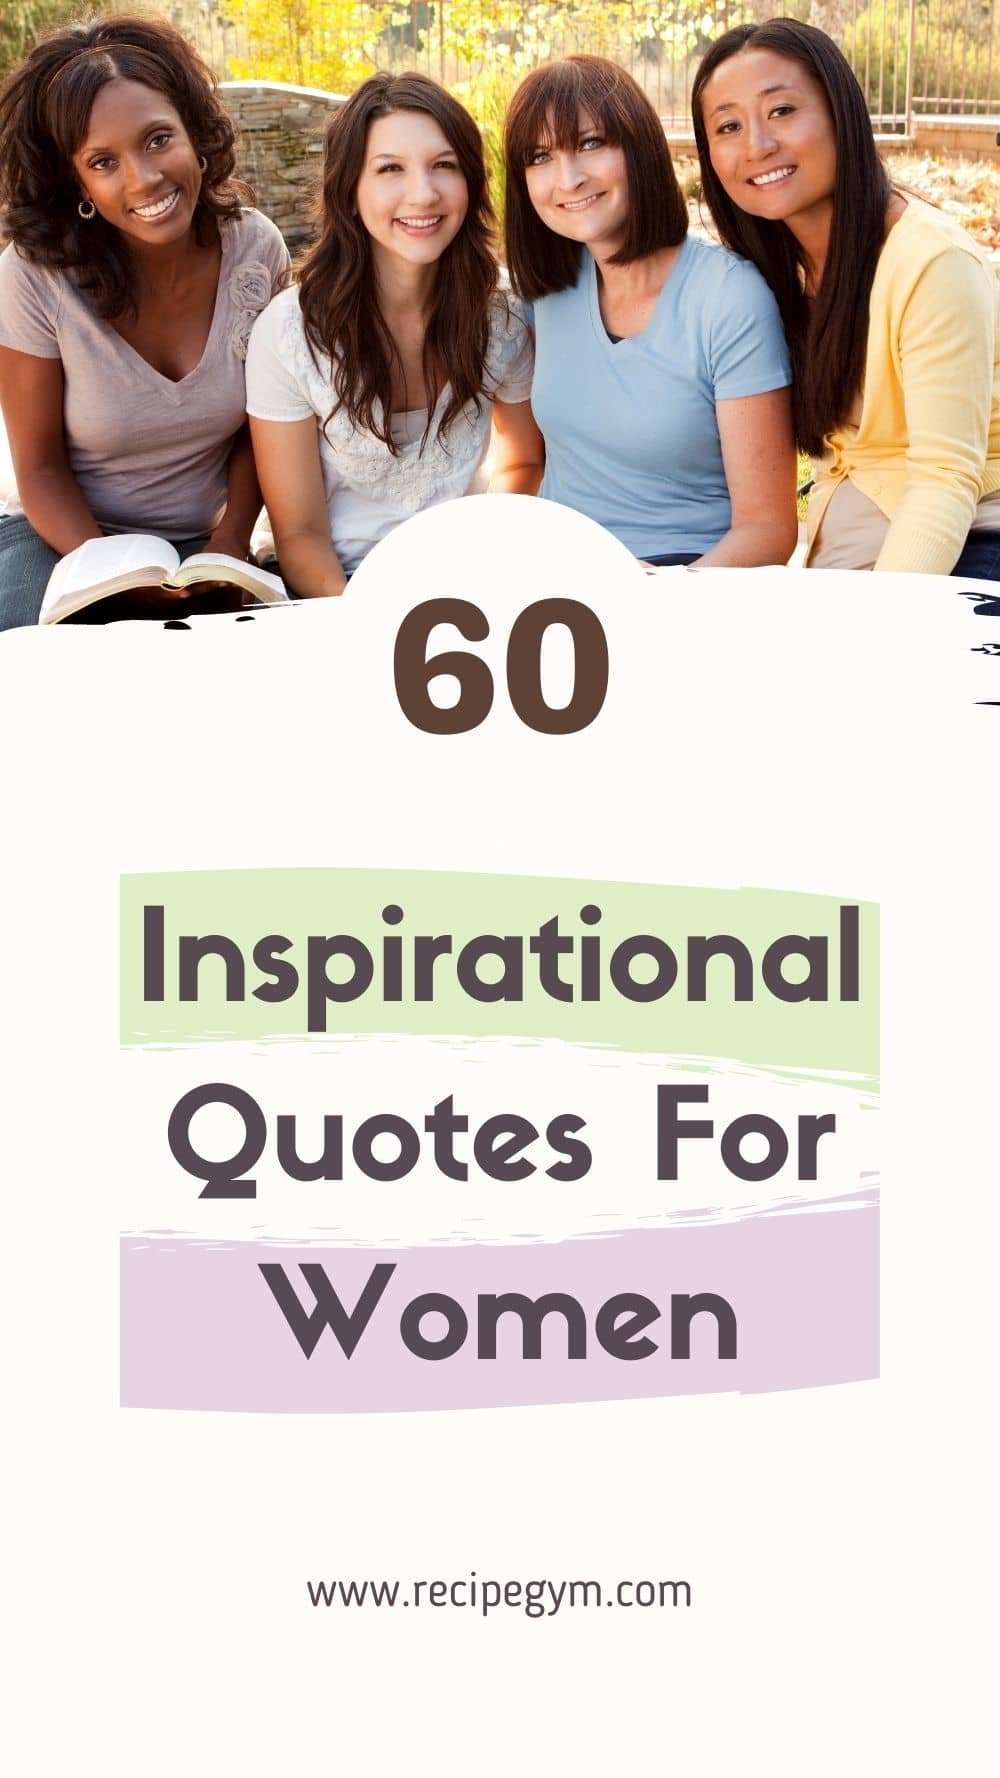 Inspirational Quotes For Women